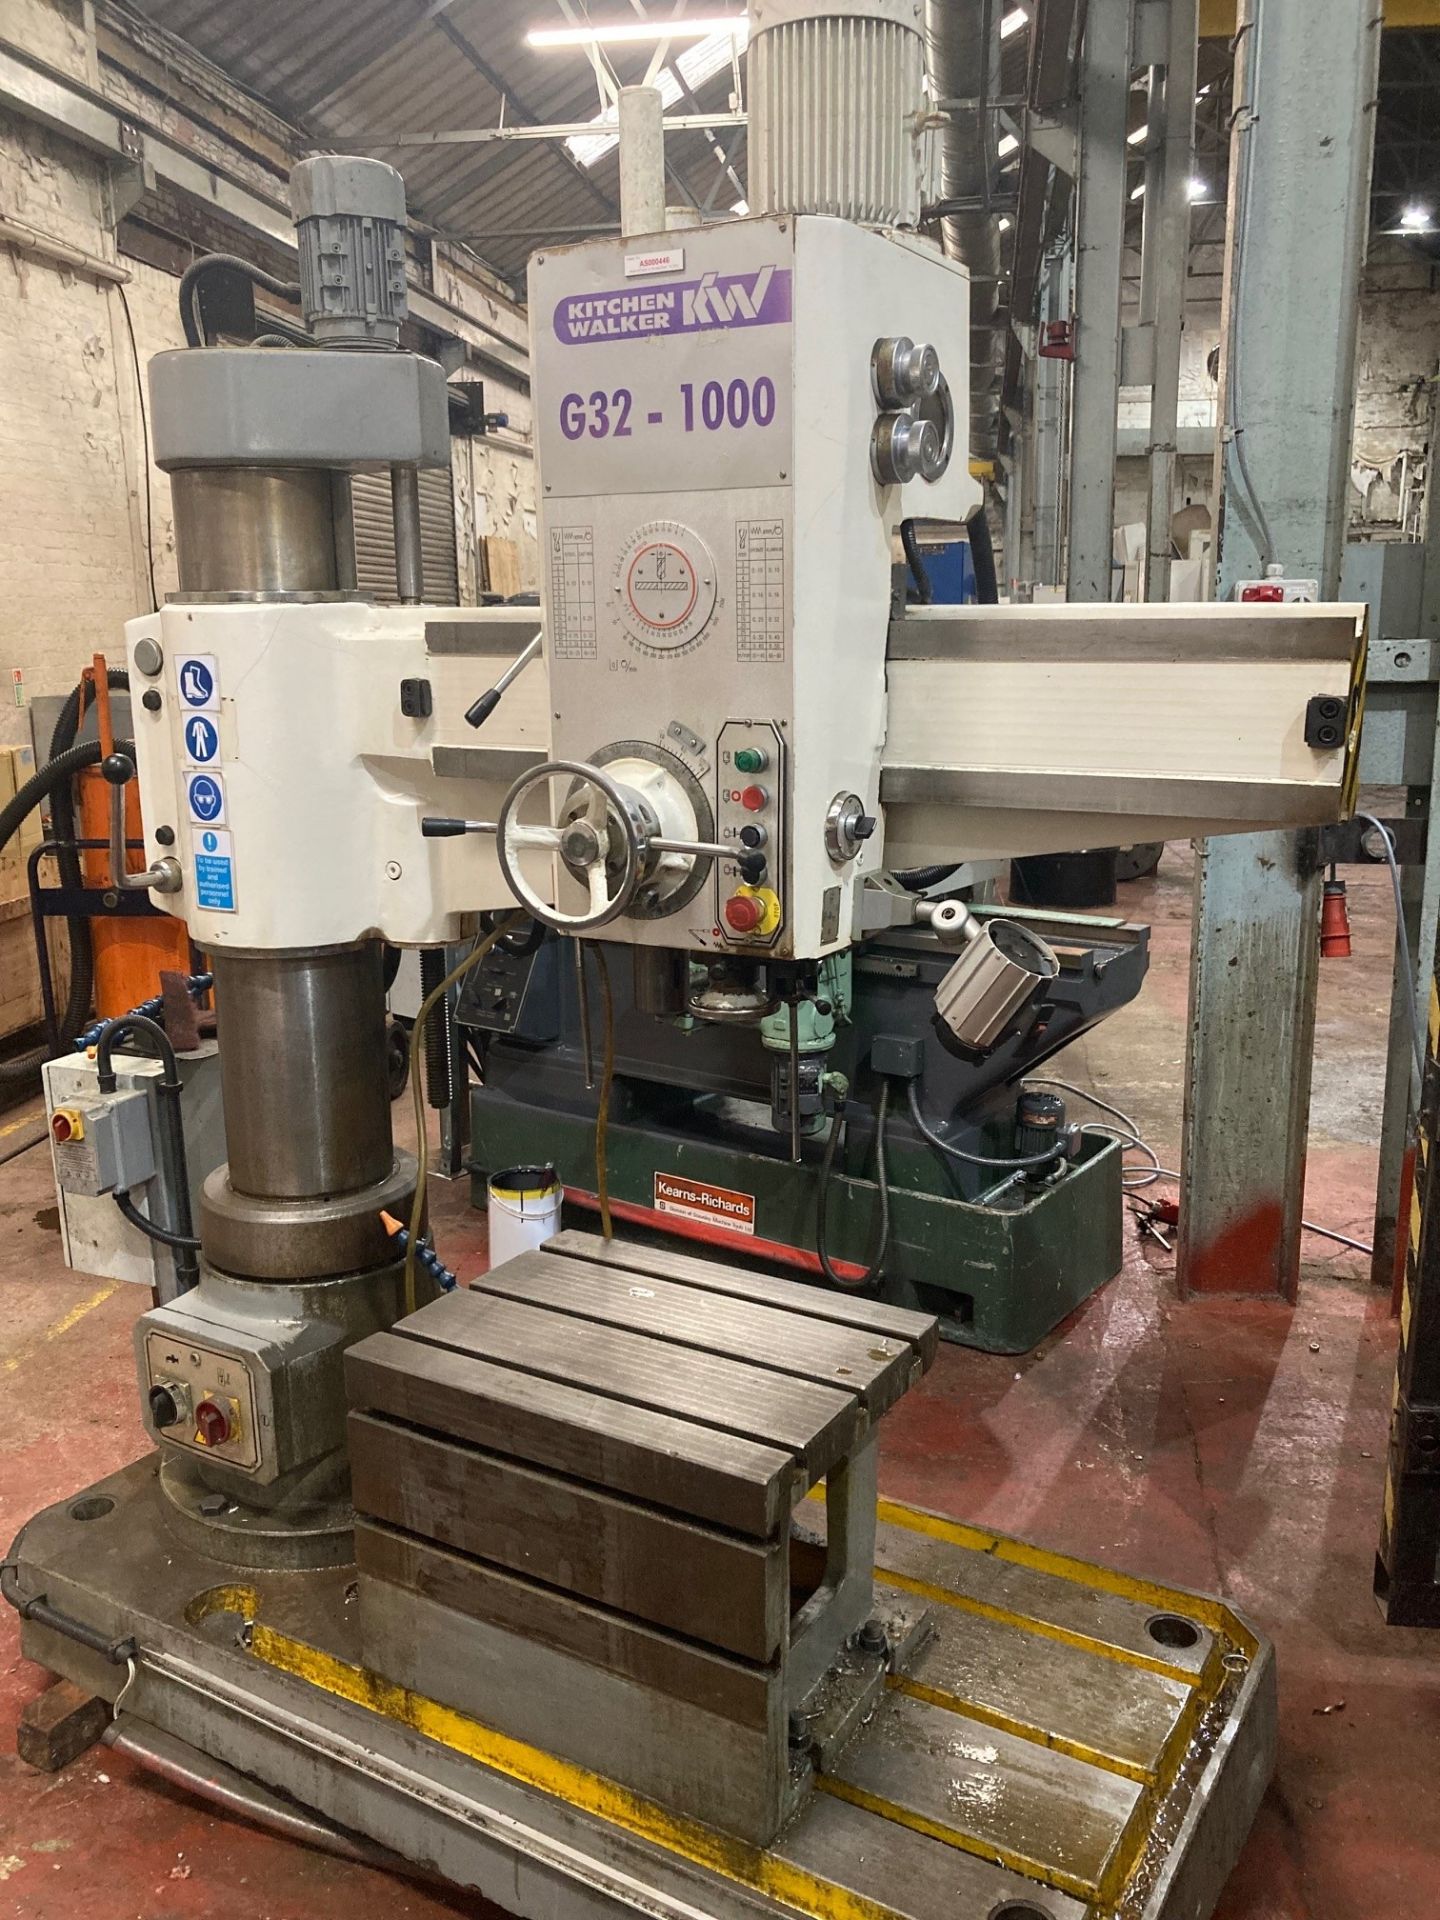 Kitchen and Walker G32 – 1000 Radial Arm Drill - Image 2 of 10